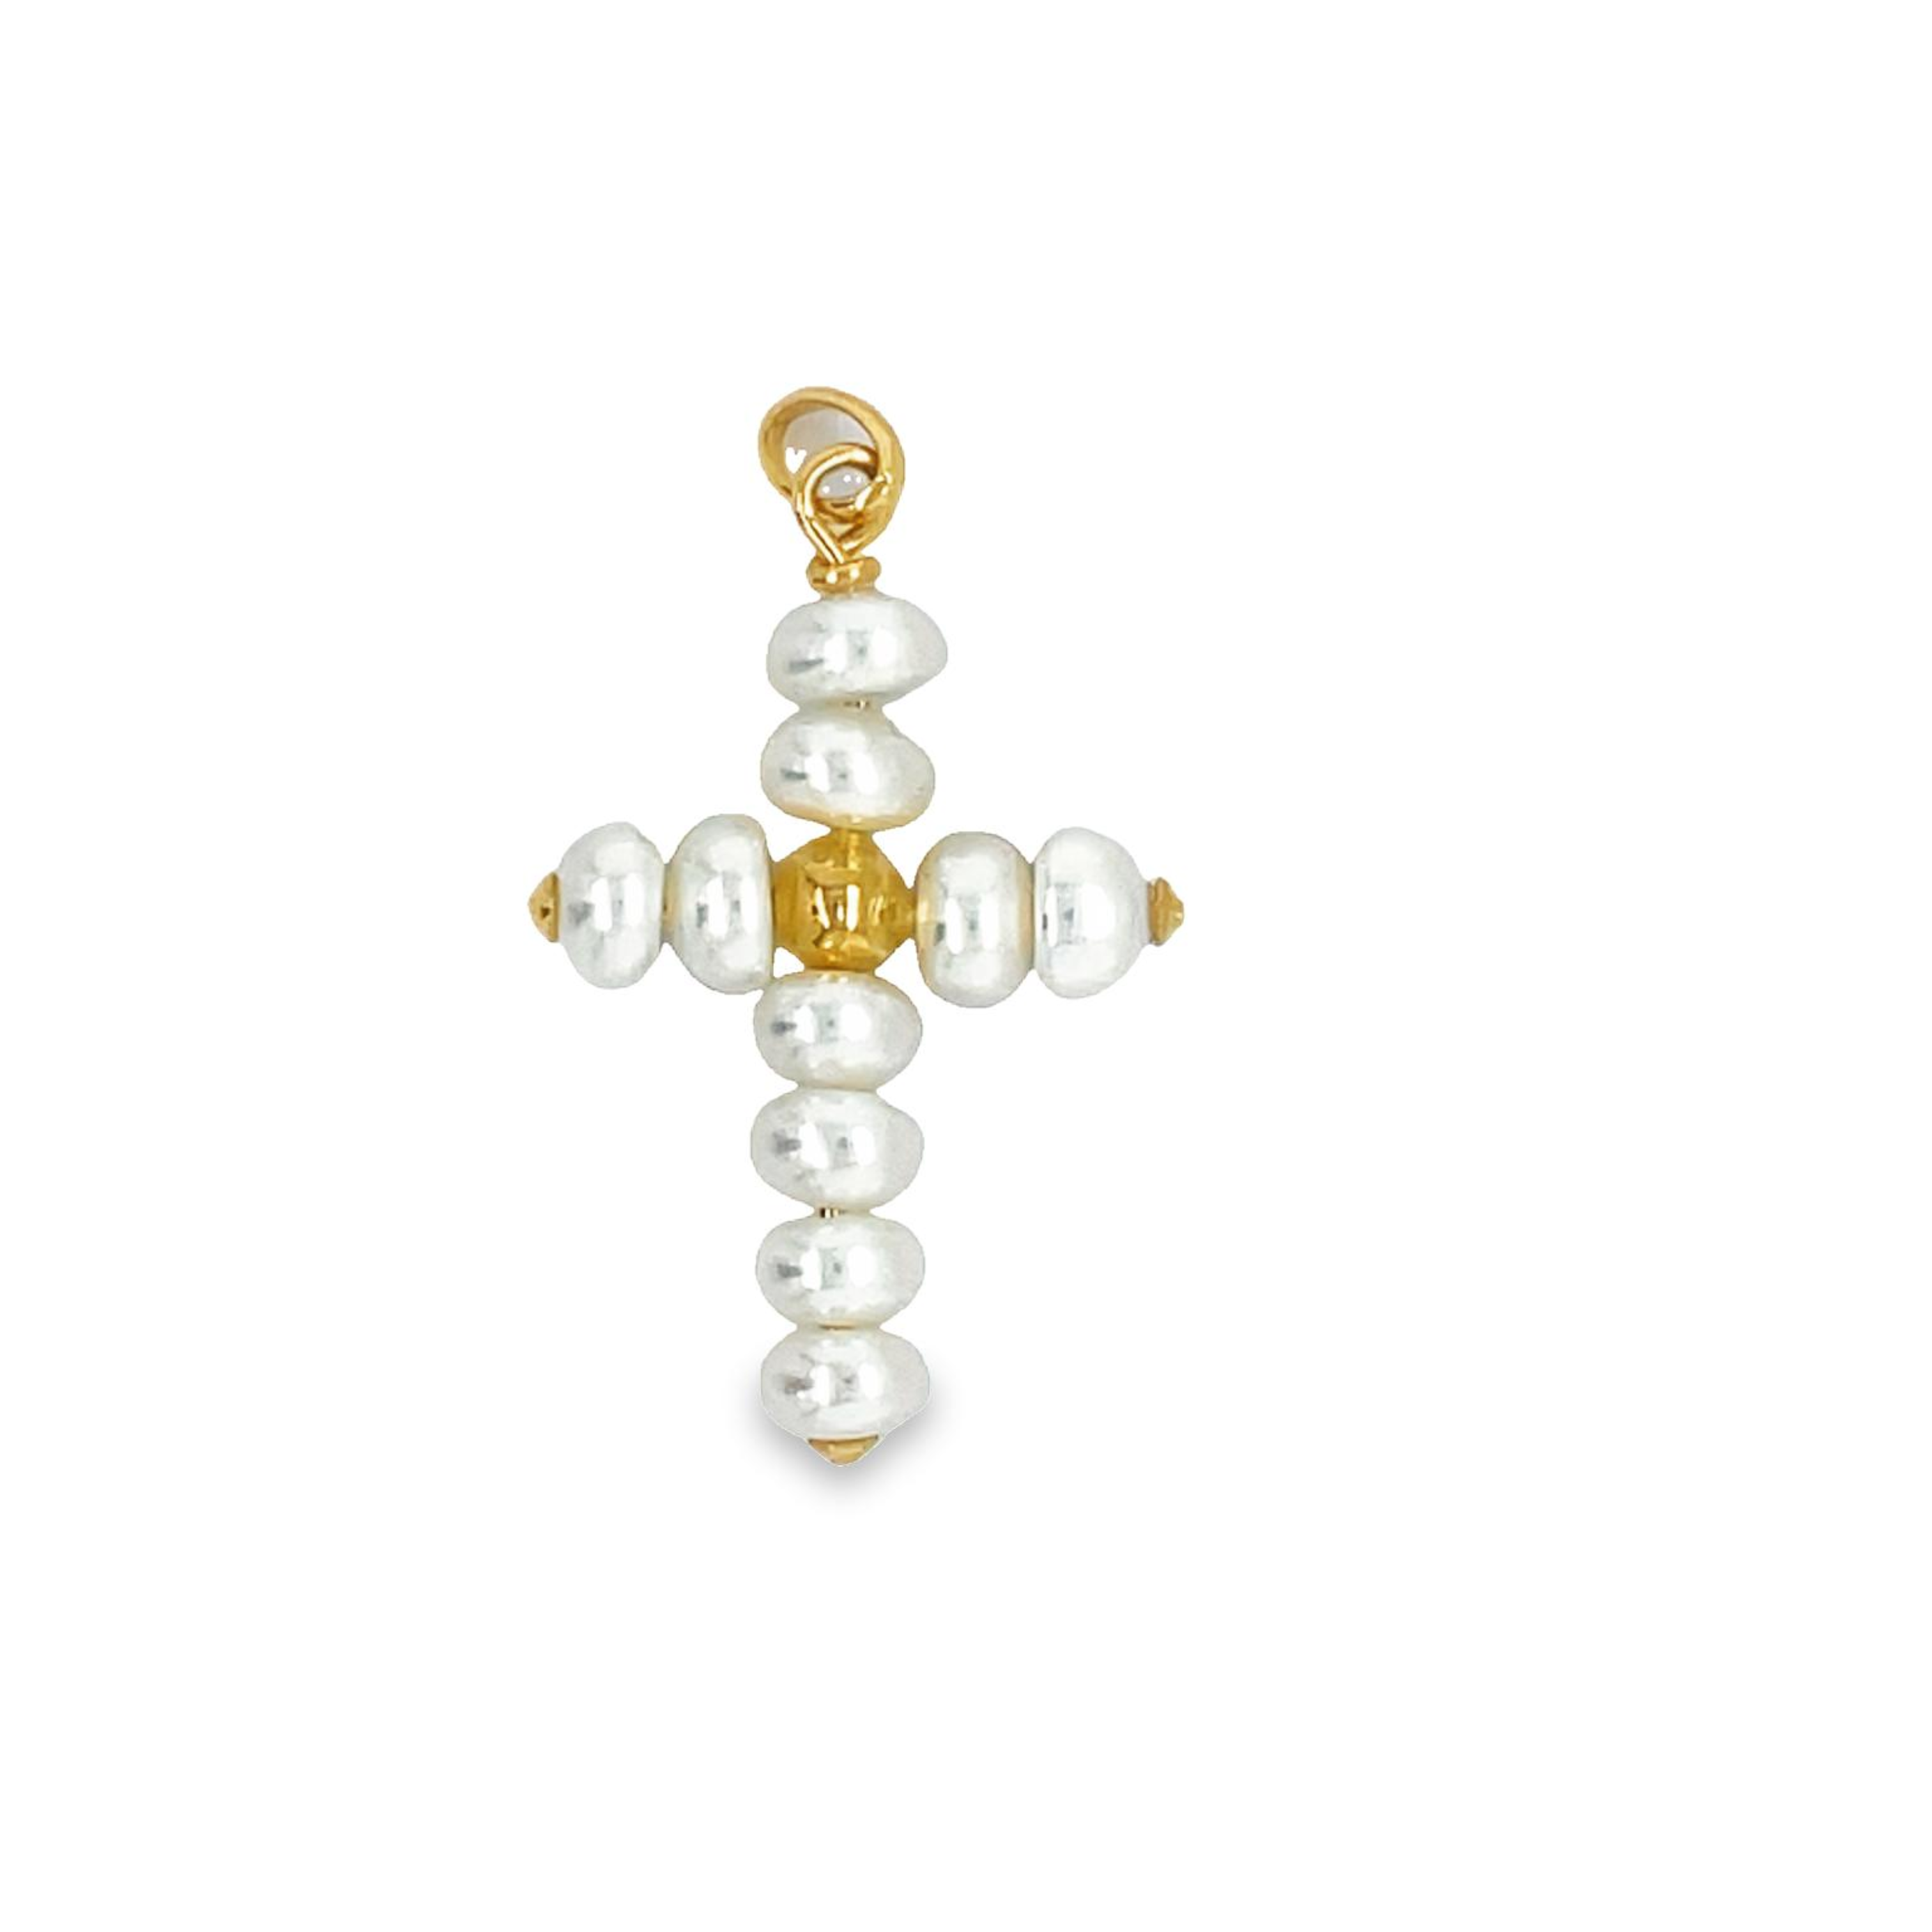 This pendant is crafted from 18K white gold and features a beautiful cultured pearls set in the shape of a cross. Its secure gold bail ensures the pendant won't slip during everyday activities. Measuring 1" long, this elegant pendant makes a stylish accessory for children.